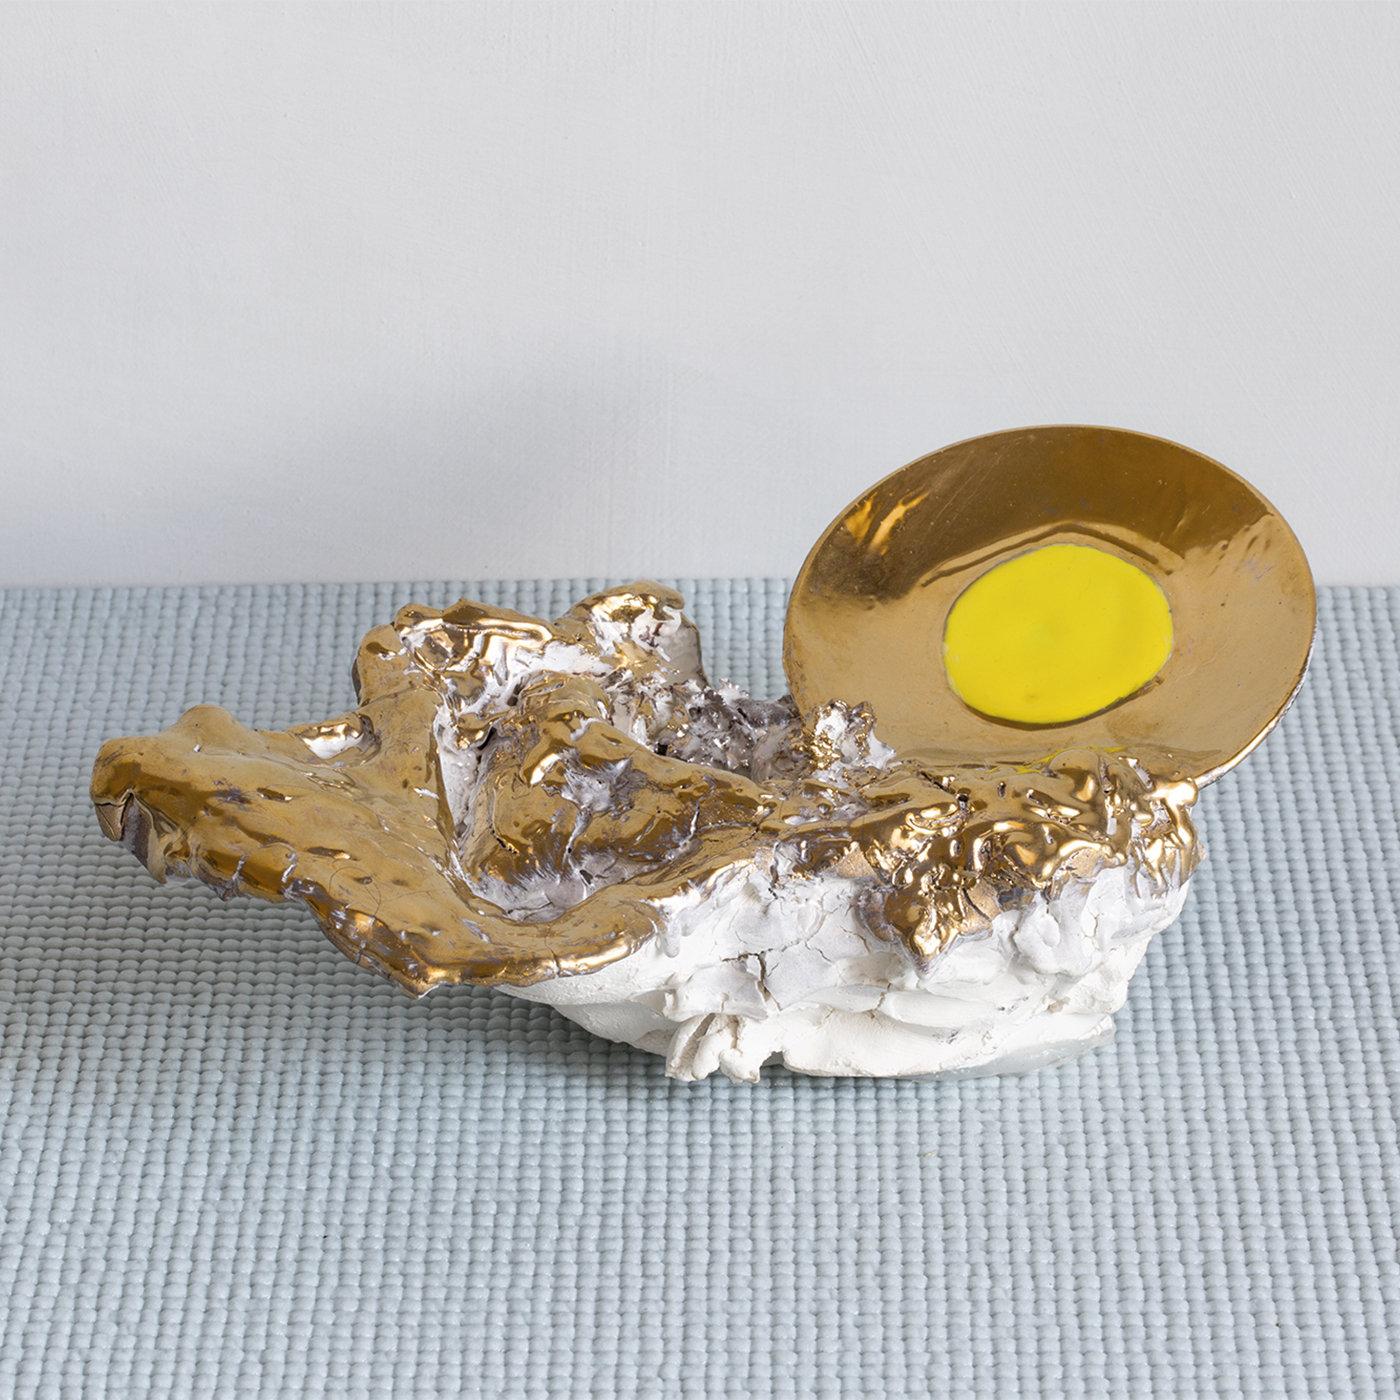 This splendid centerpiece will be the focal point of any table setting. Forming a world to explore with a rock style surface in magnificent gold and a touch of yellow, it is part of an intriguing world of artistry. These pieces are made in total